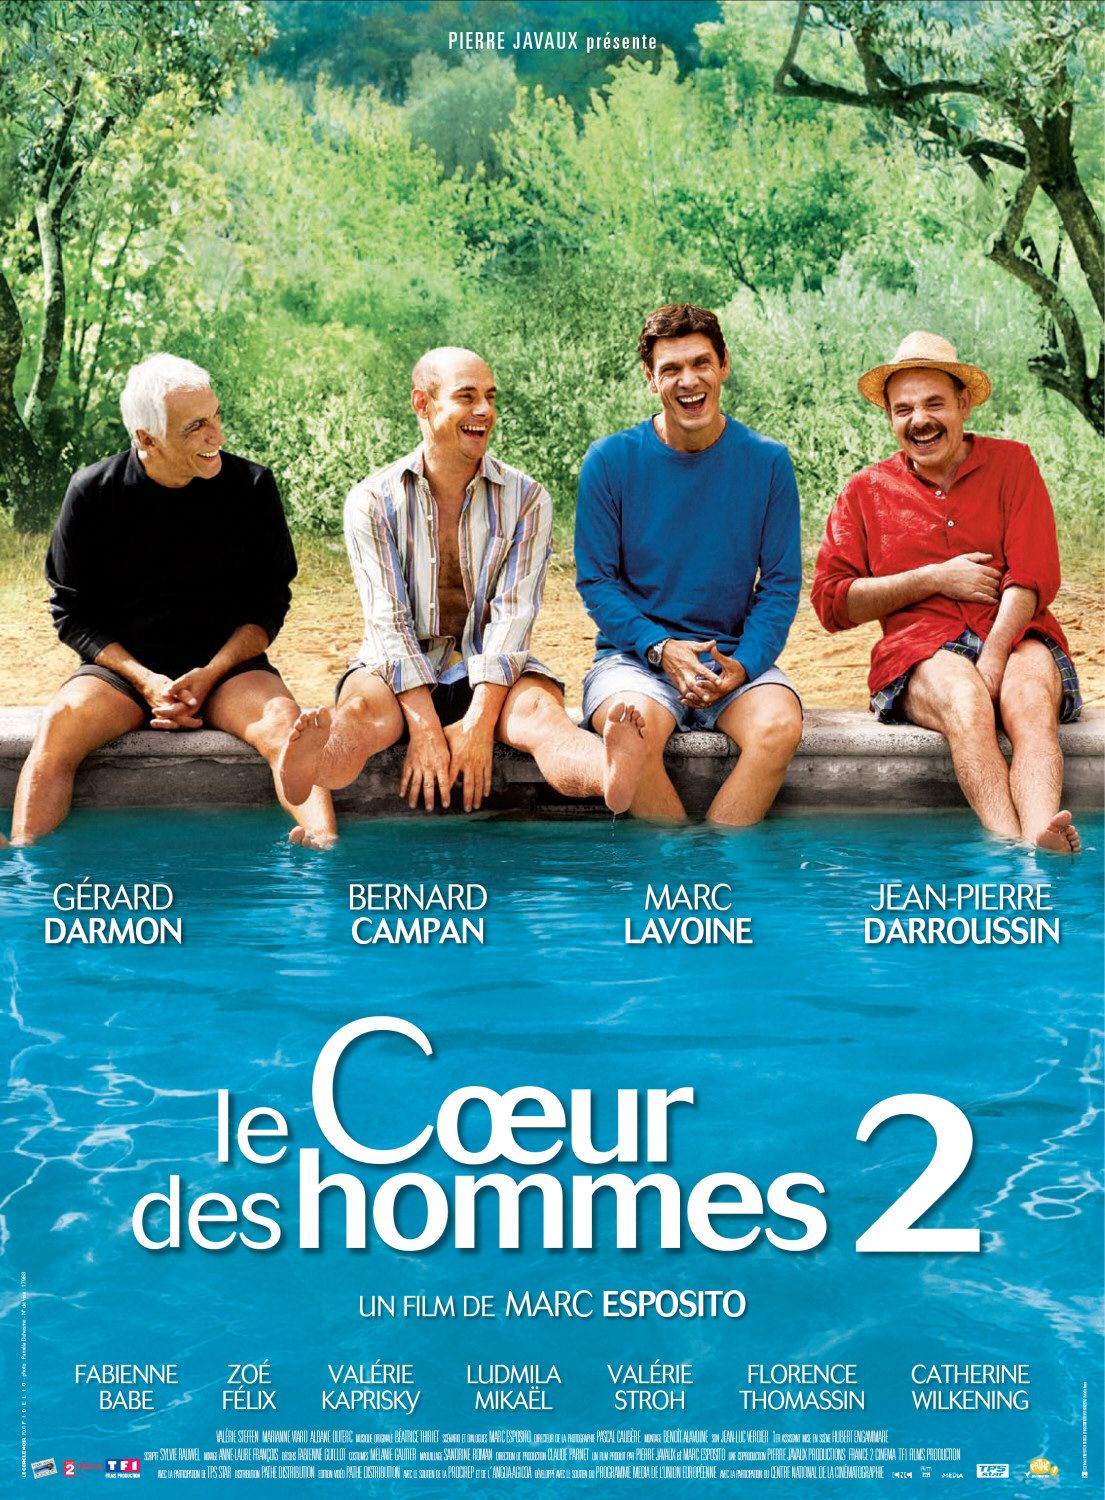 Extra Large Movie Poster Image for Coeur des hommes 2, Le 